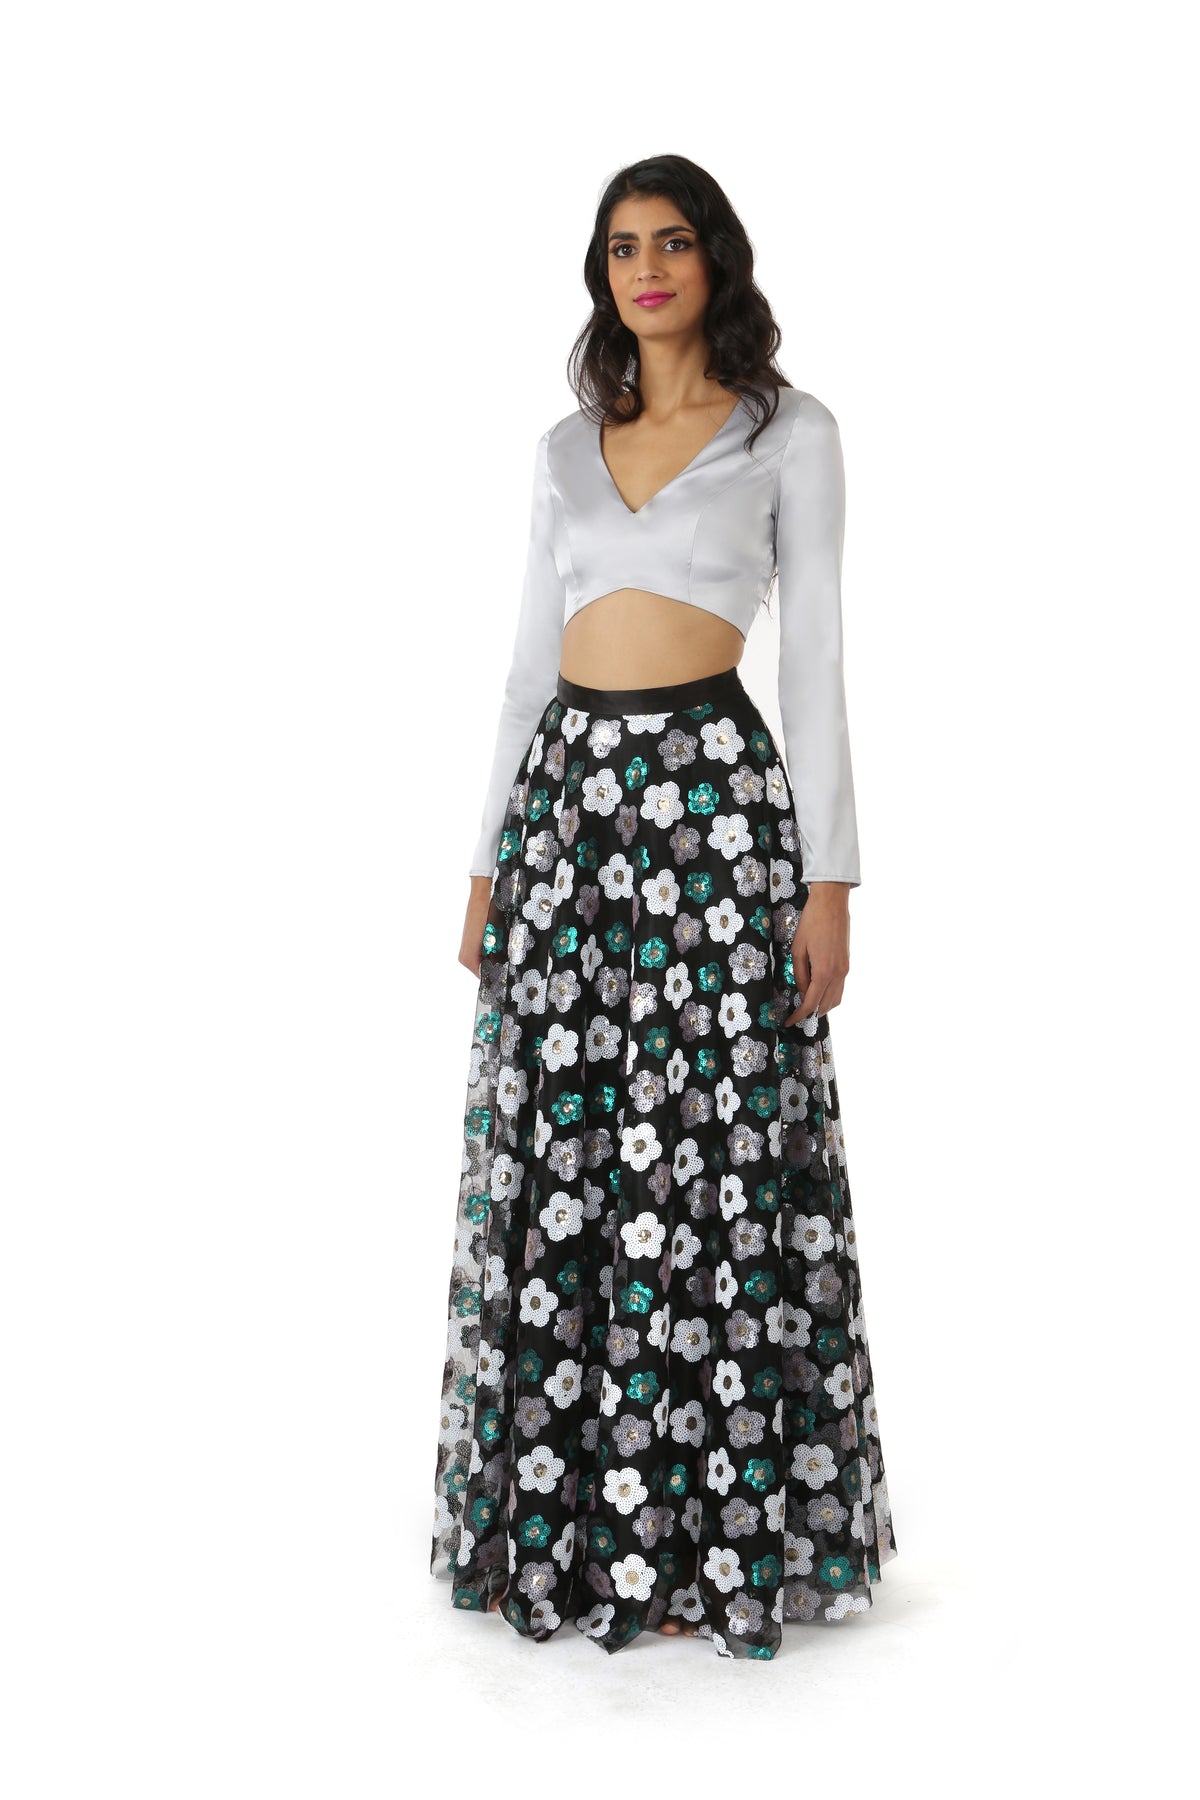 NIDA Silver Satin Crop Top with V Neckline and Long Sleeves - Front View | HARLEEN KAUR